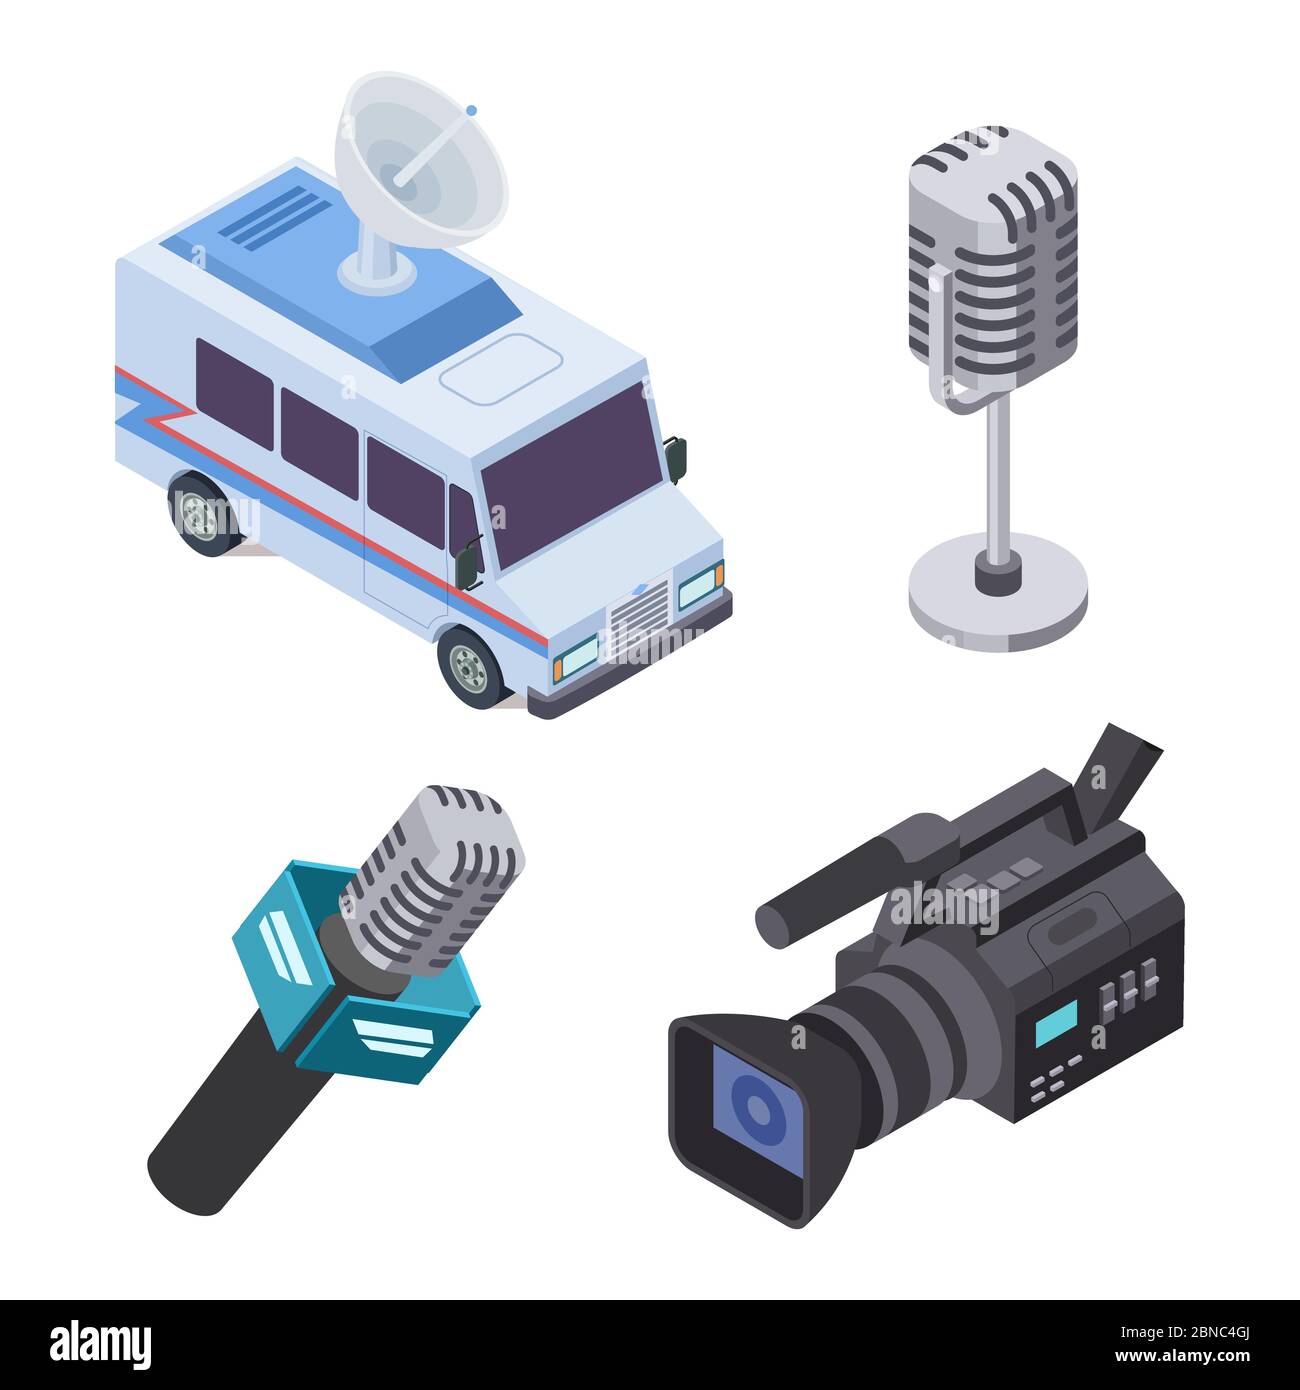 Broadcasting equipment. Television stream electronics, telecommunications 3d isometric vector elements isolated on white illustration Stock Vector